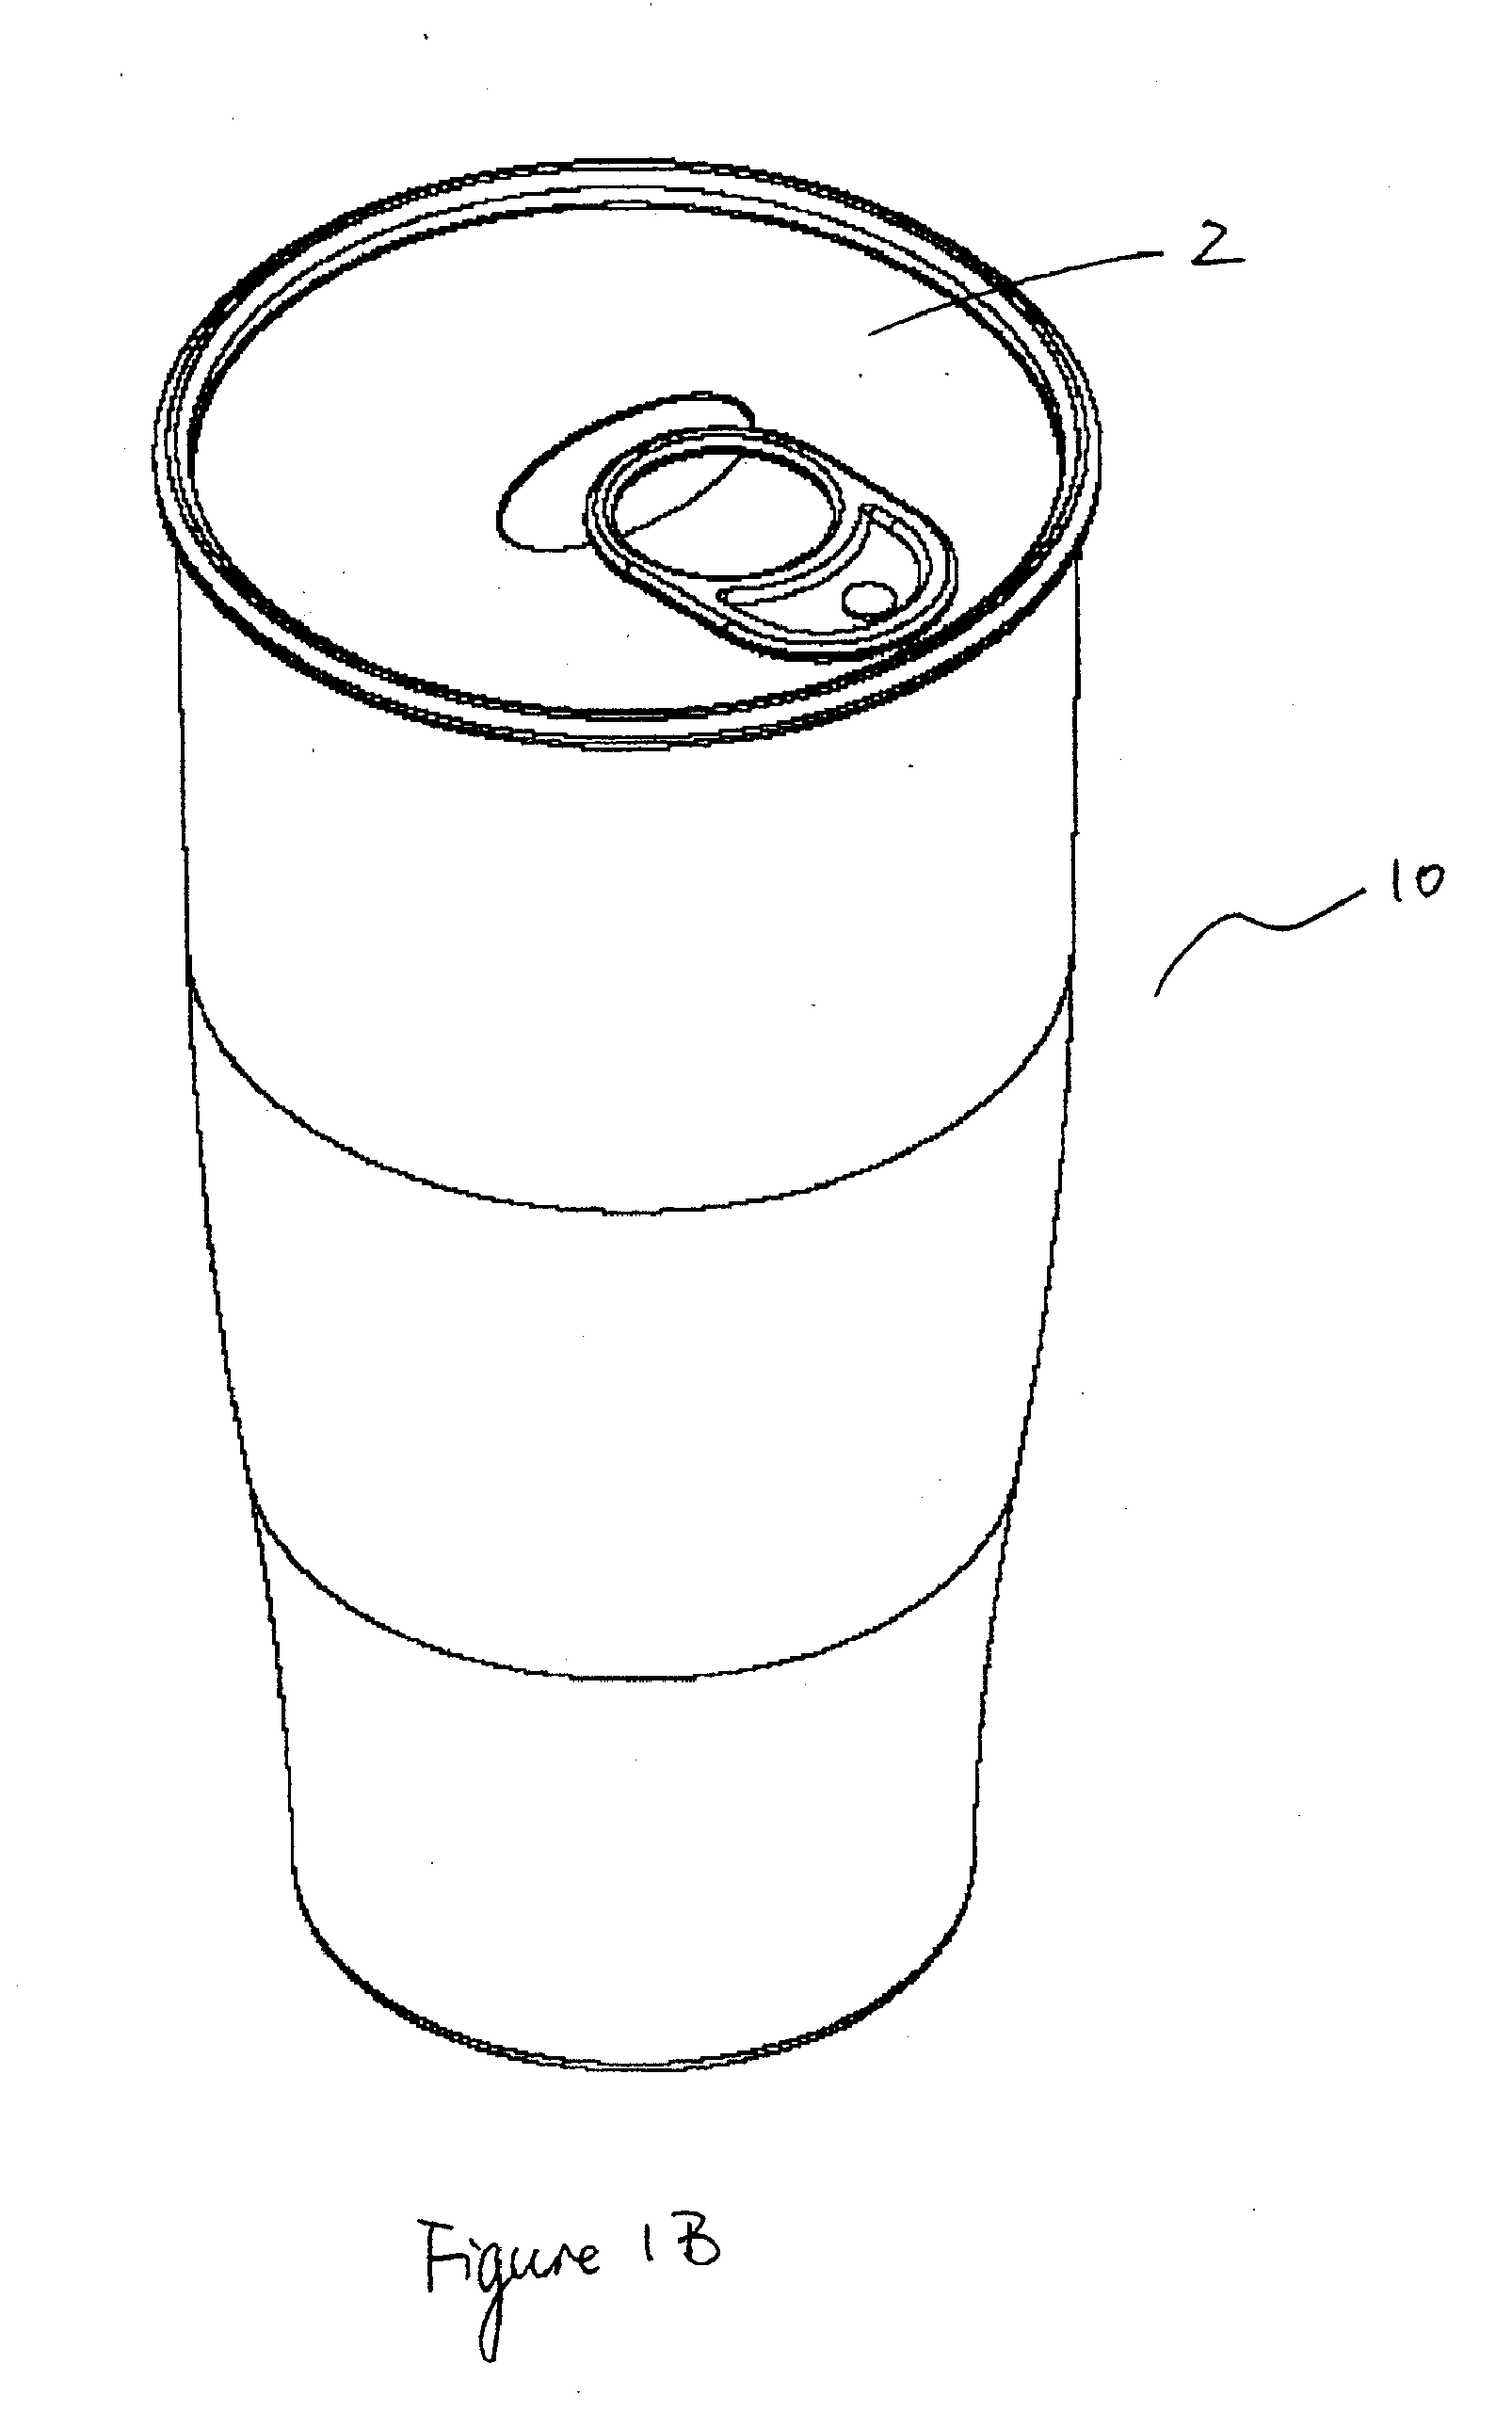 Self-heating apparatuses using solid chemical reactants